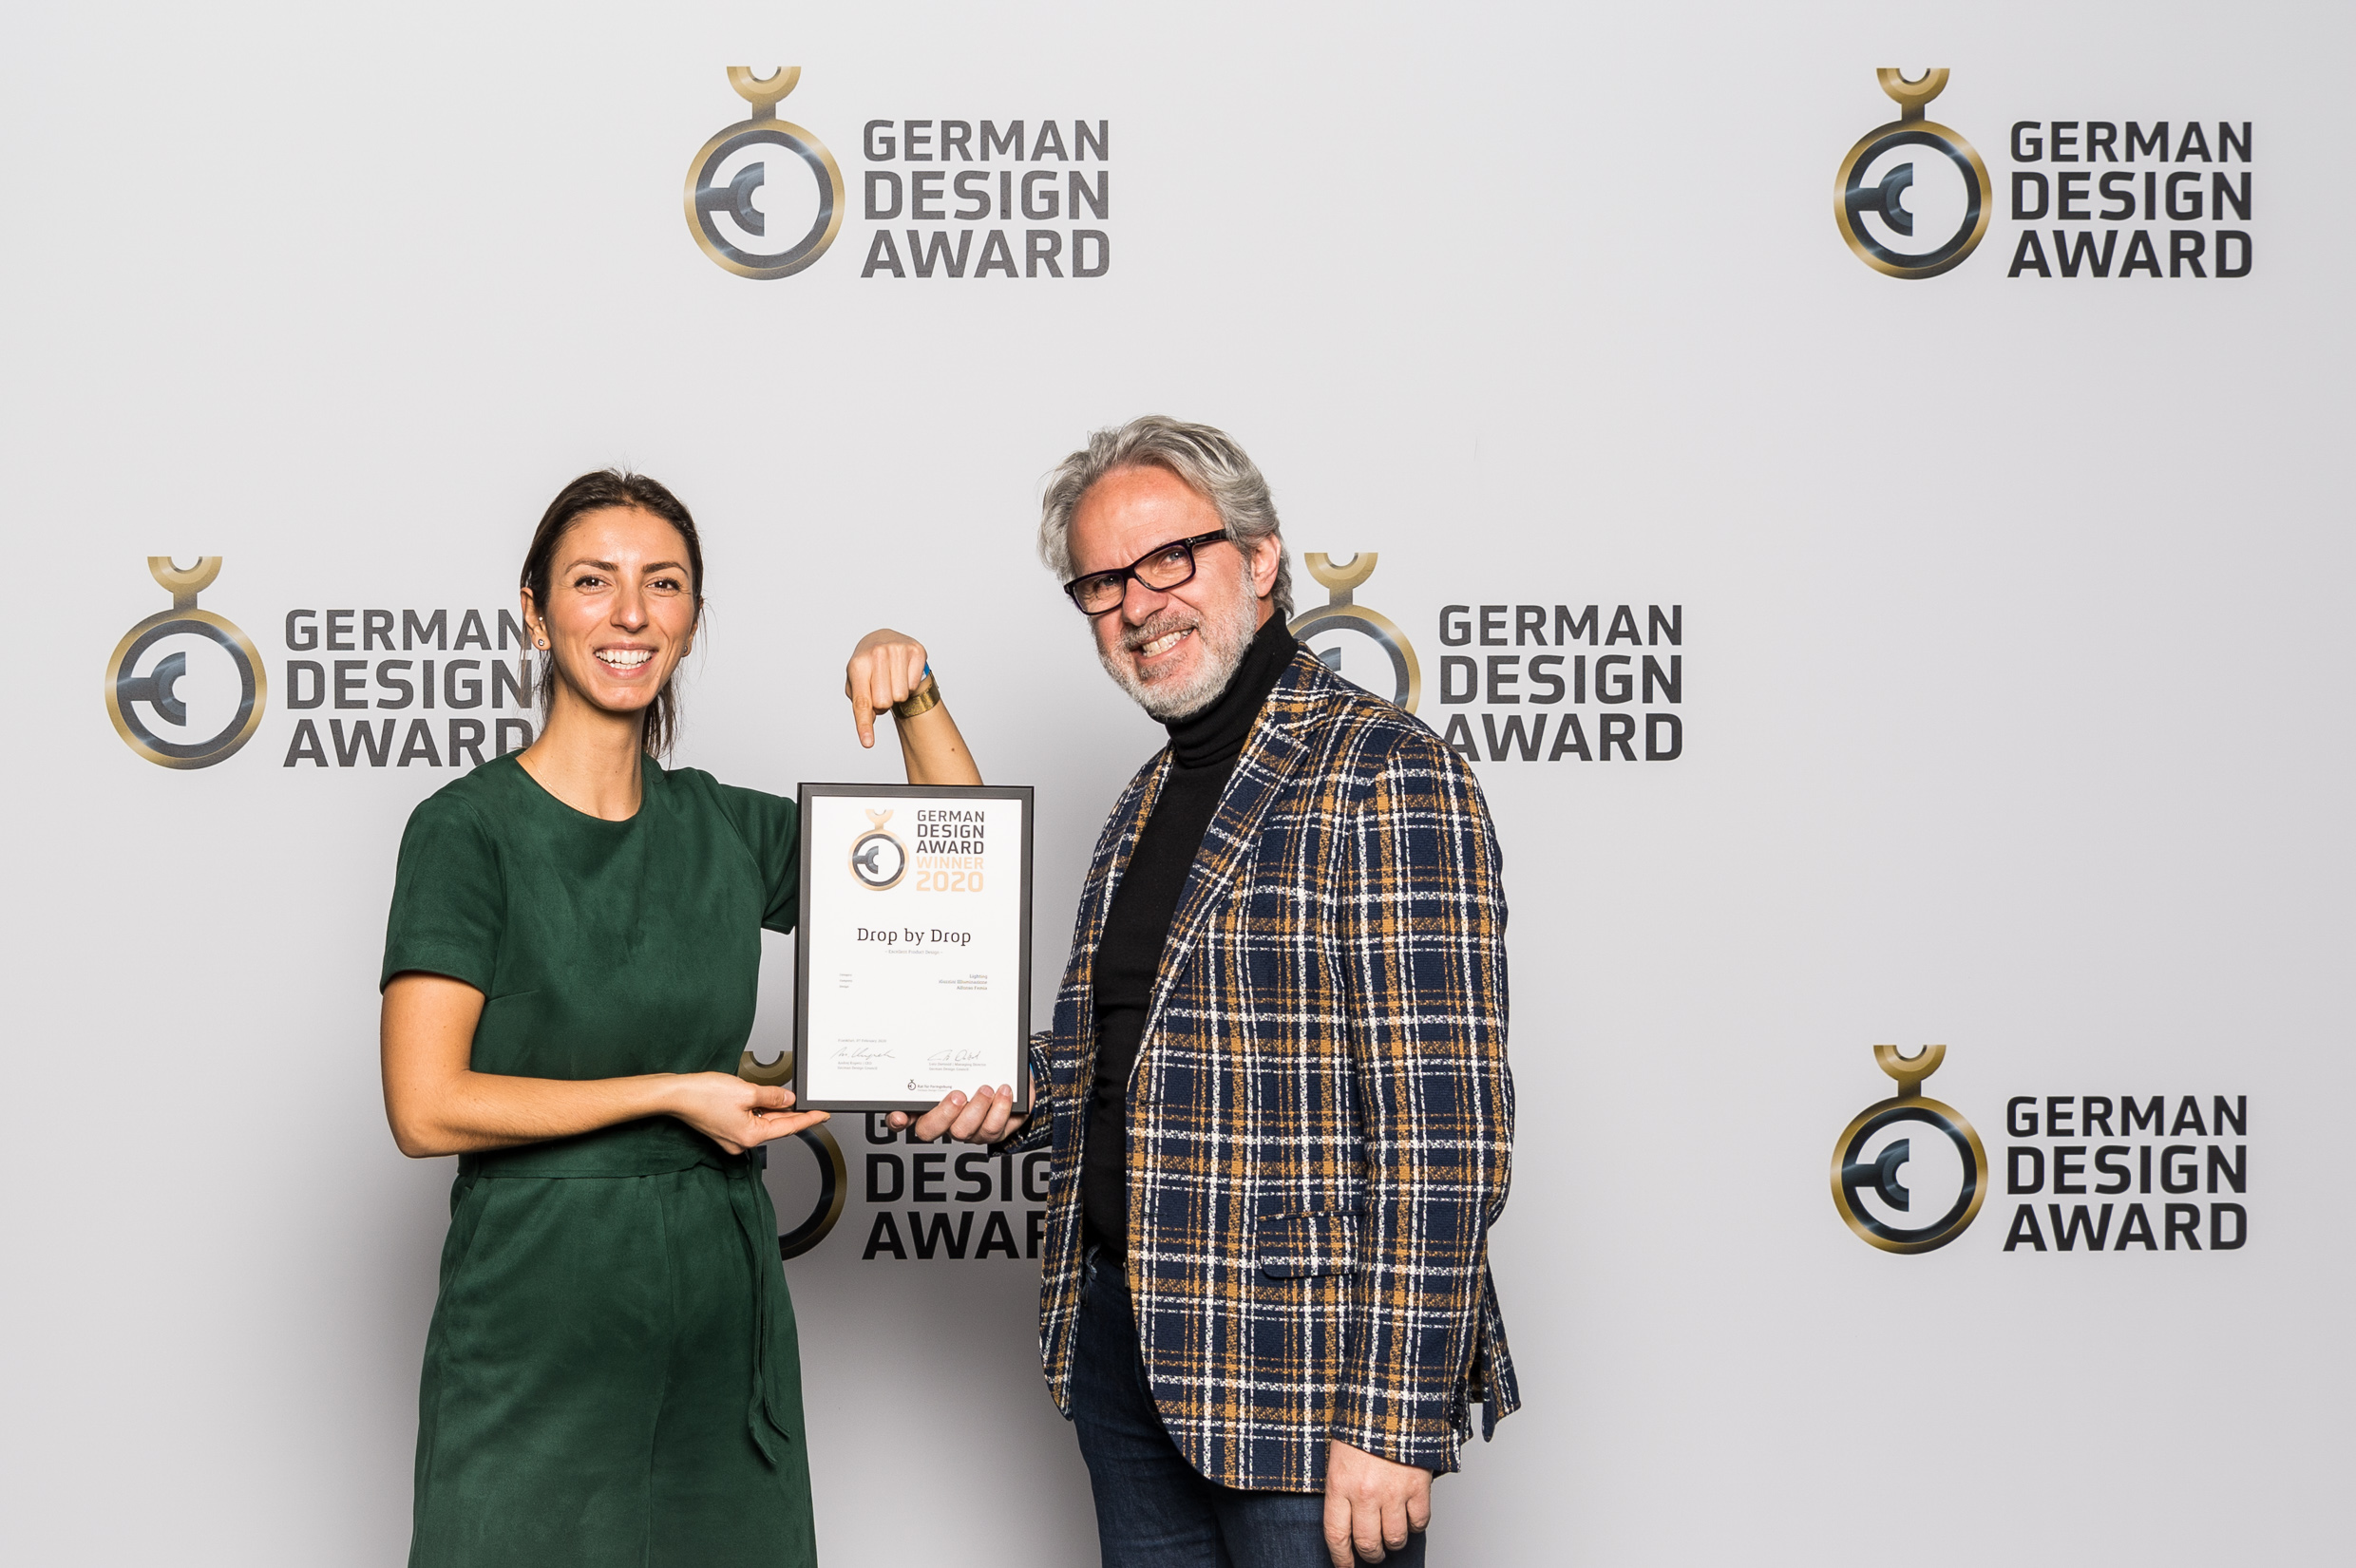 The 2020 German Design Award goes to Drop by Drop.